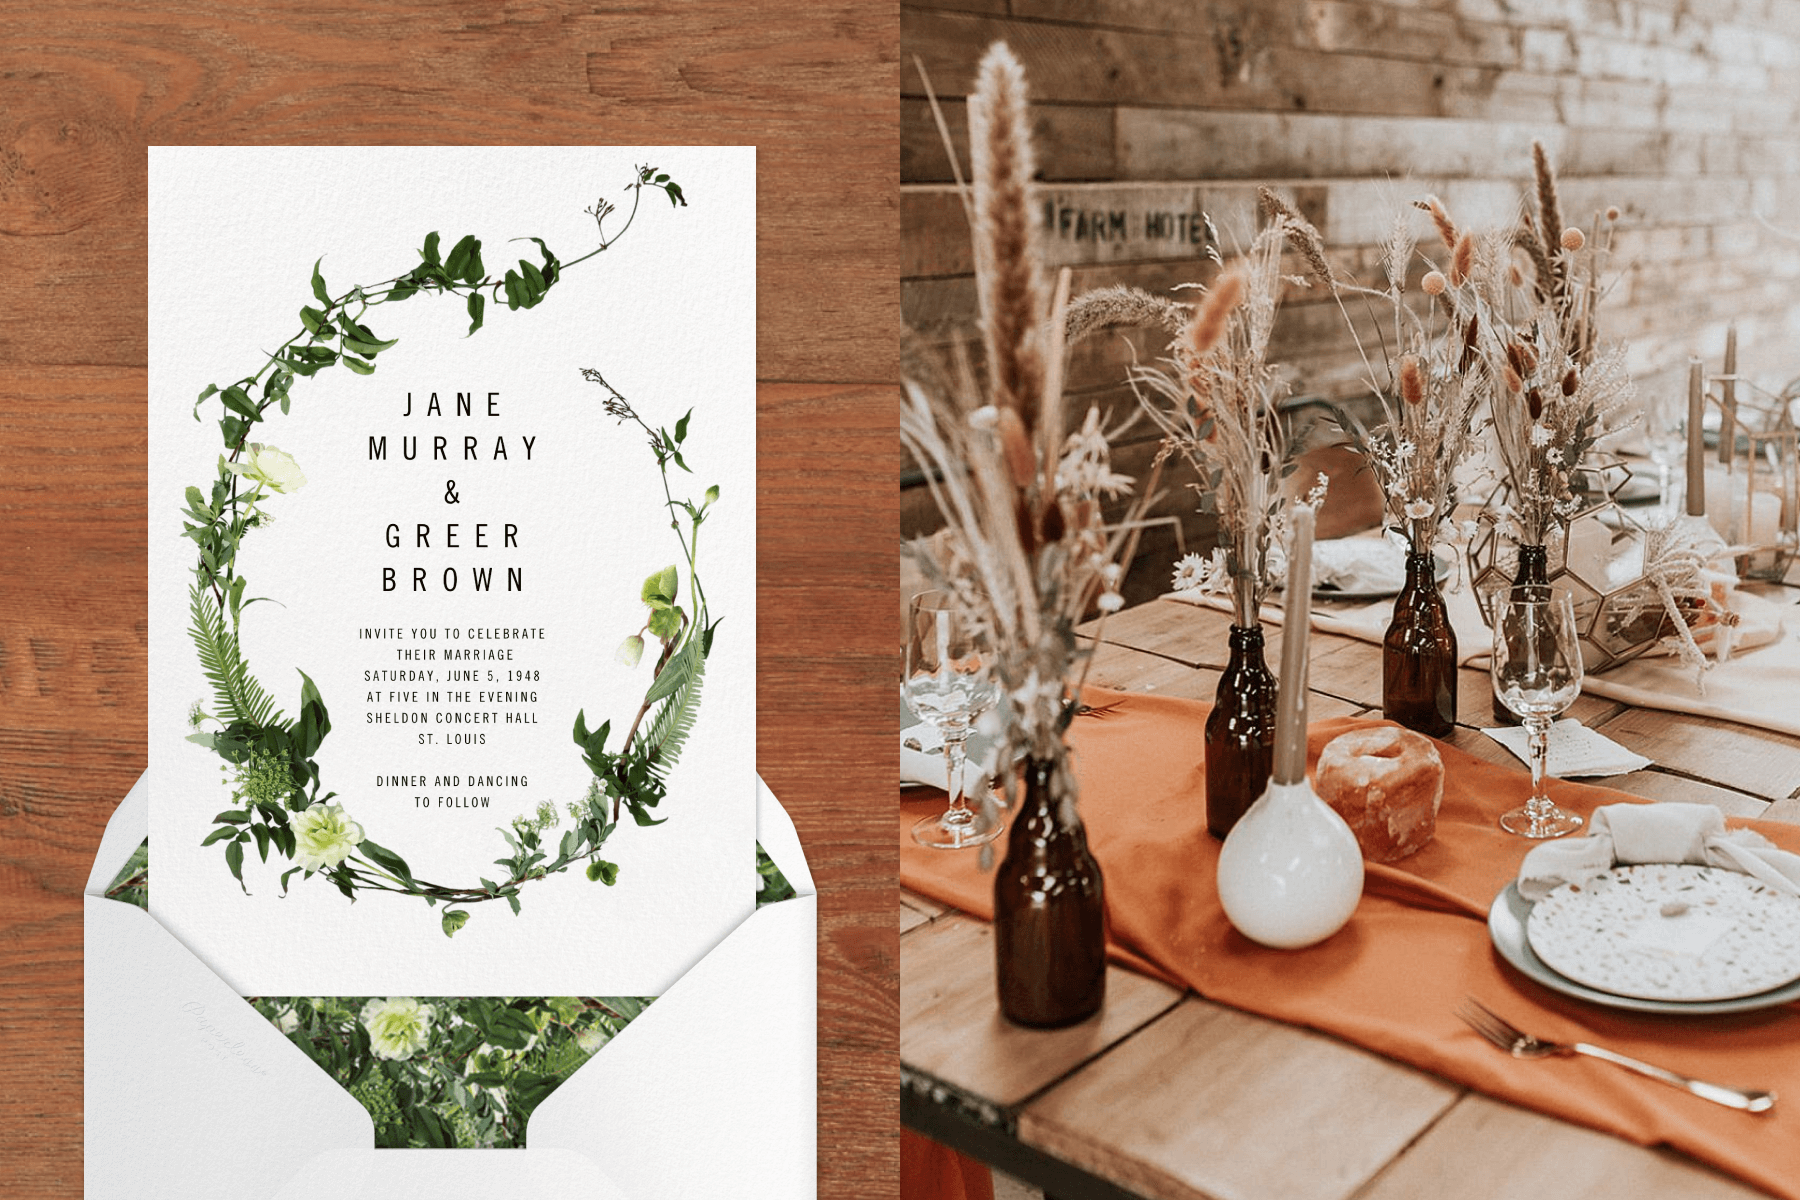 Left: A wedding invitation with a green floral illustration; Right: A rustic wedding table with dried floral and orange accents.